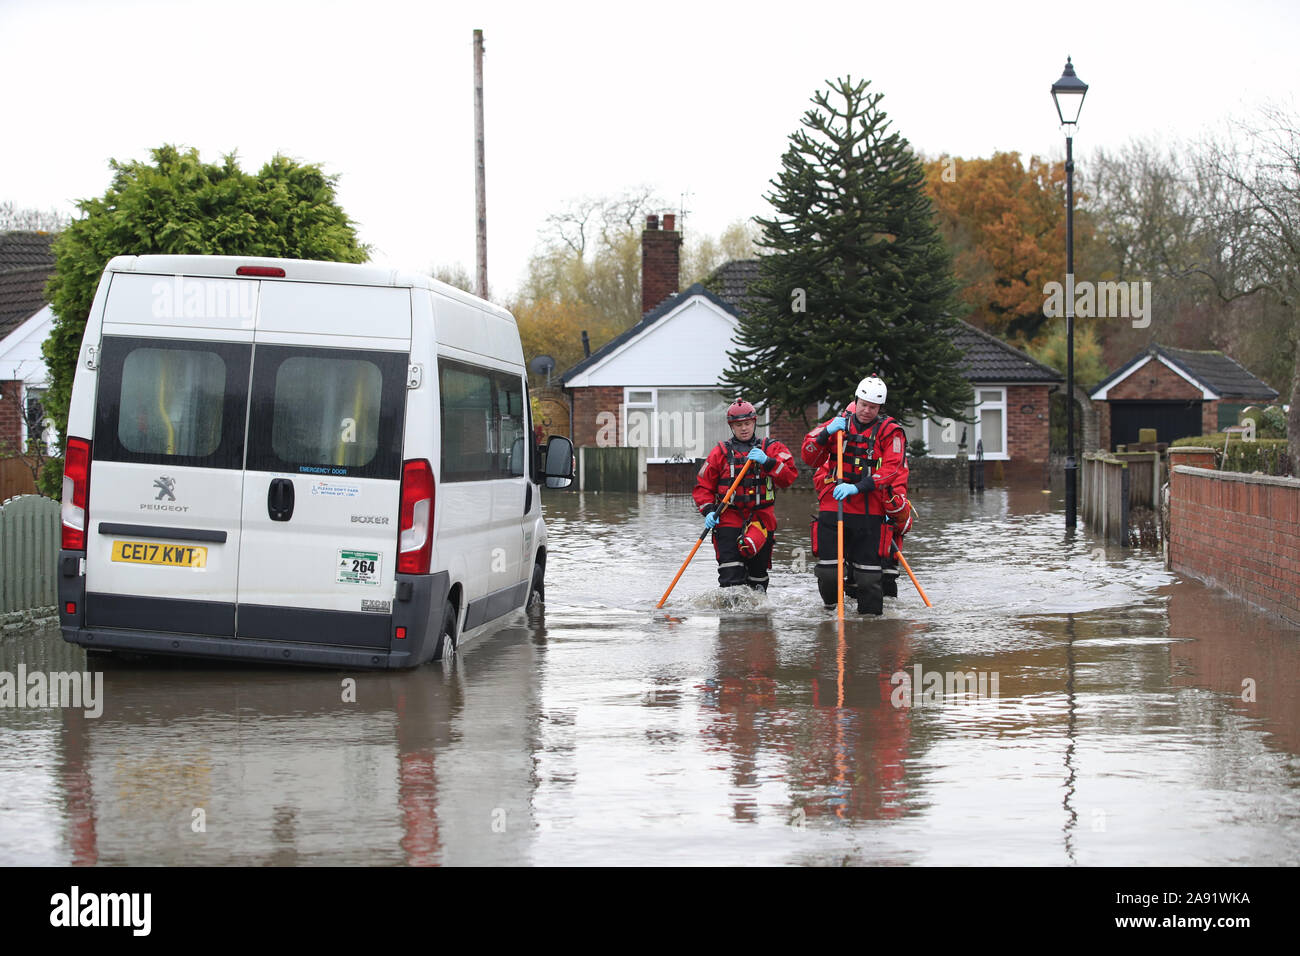 Rescuers walk through floodwater outside a house in Fishlake, Doncaster. The Prime Minister is set to chair a meeting of the Government's emergency committee after severe flooding in parts of the country, where rain is finally expected to ease this afternoon. Stock Photo